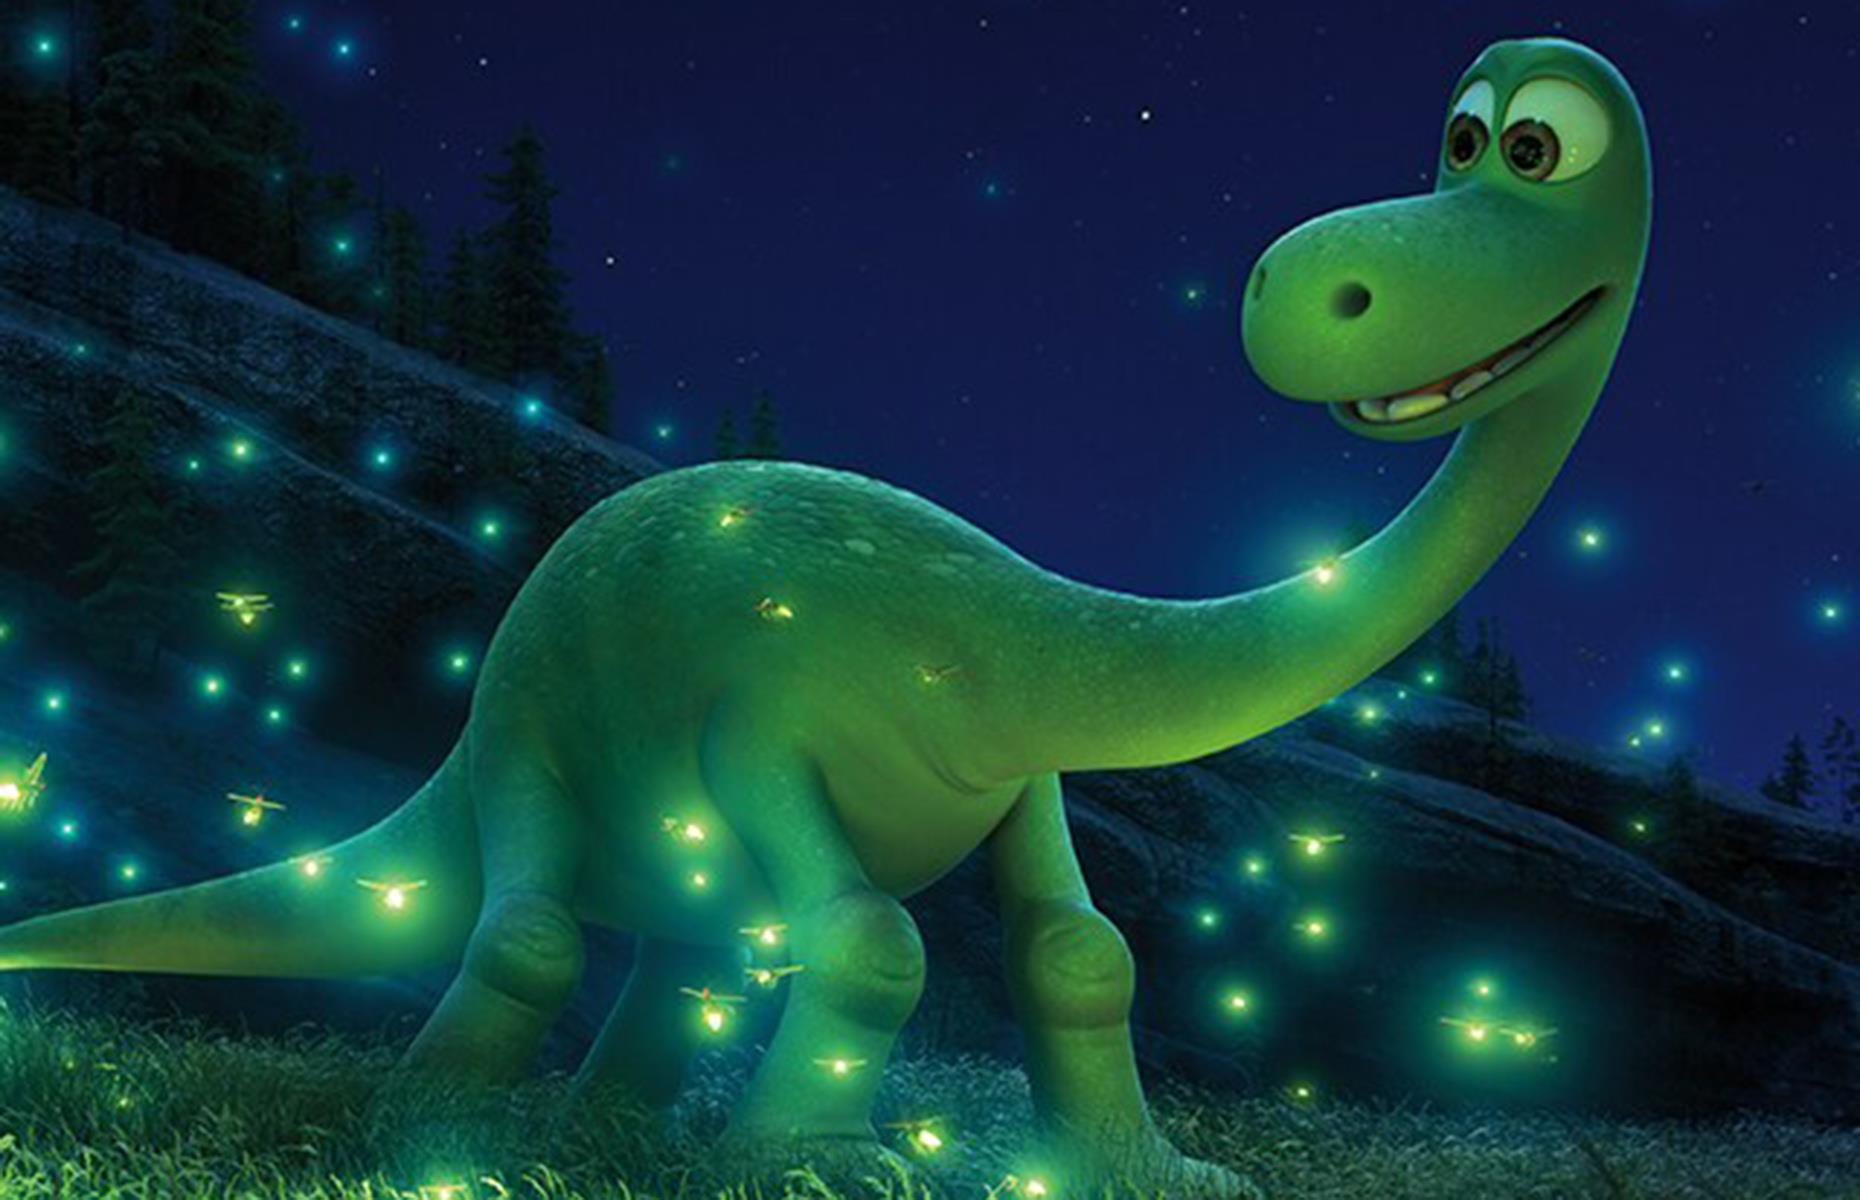 <p>Disney Pixar’s family-friendly animated flick <em>The Good Dinosaur </em>hit the silver screen in November 2015, hoping to take the Thanksgiving box office by storm.</p>  <p>While the project had a giant $200 million budget behind it, industry experts said at the time that it would need to bank an eye-watering $500 million to break even when factoring in costs such as marketing and distribution. (As reported by <em>Variety</em> in winter 2015.)</p>  <p>Despite the studio's hopes that <em>The Good Dinosaur </em>would be a roaring success, it received a lukewarm reception from audiences and pulled in just $332 million worldwide. Disney is believed to have lost around $167 million as a result. </p>